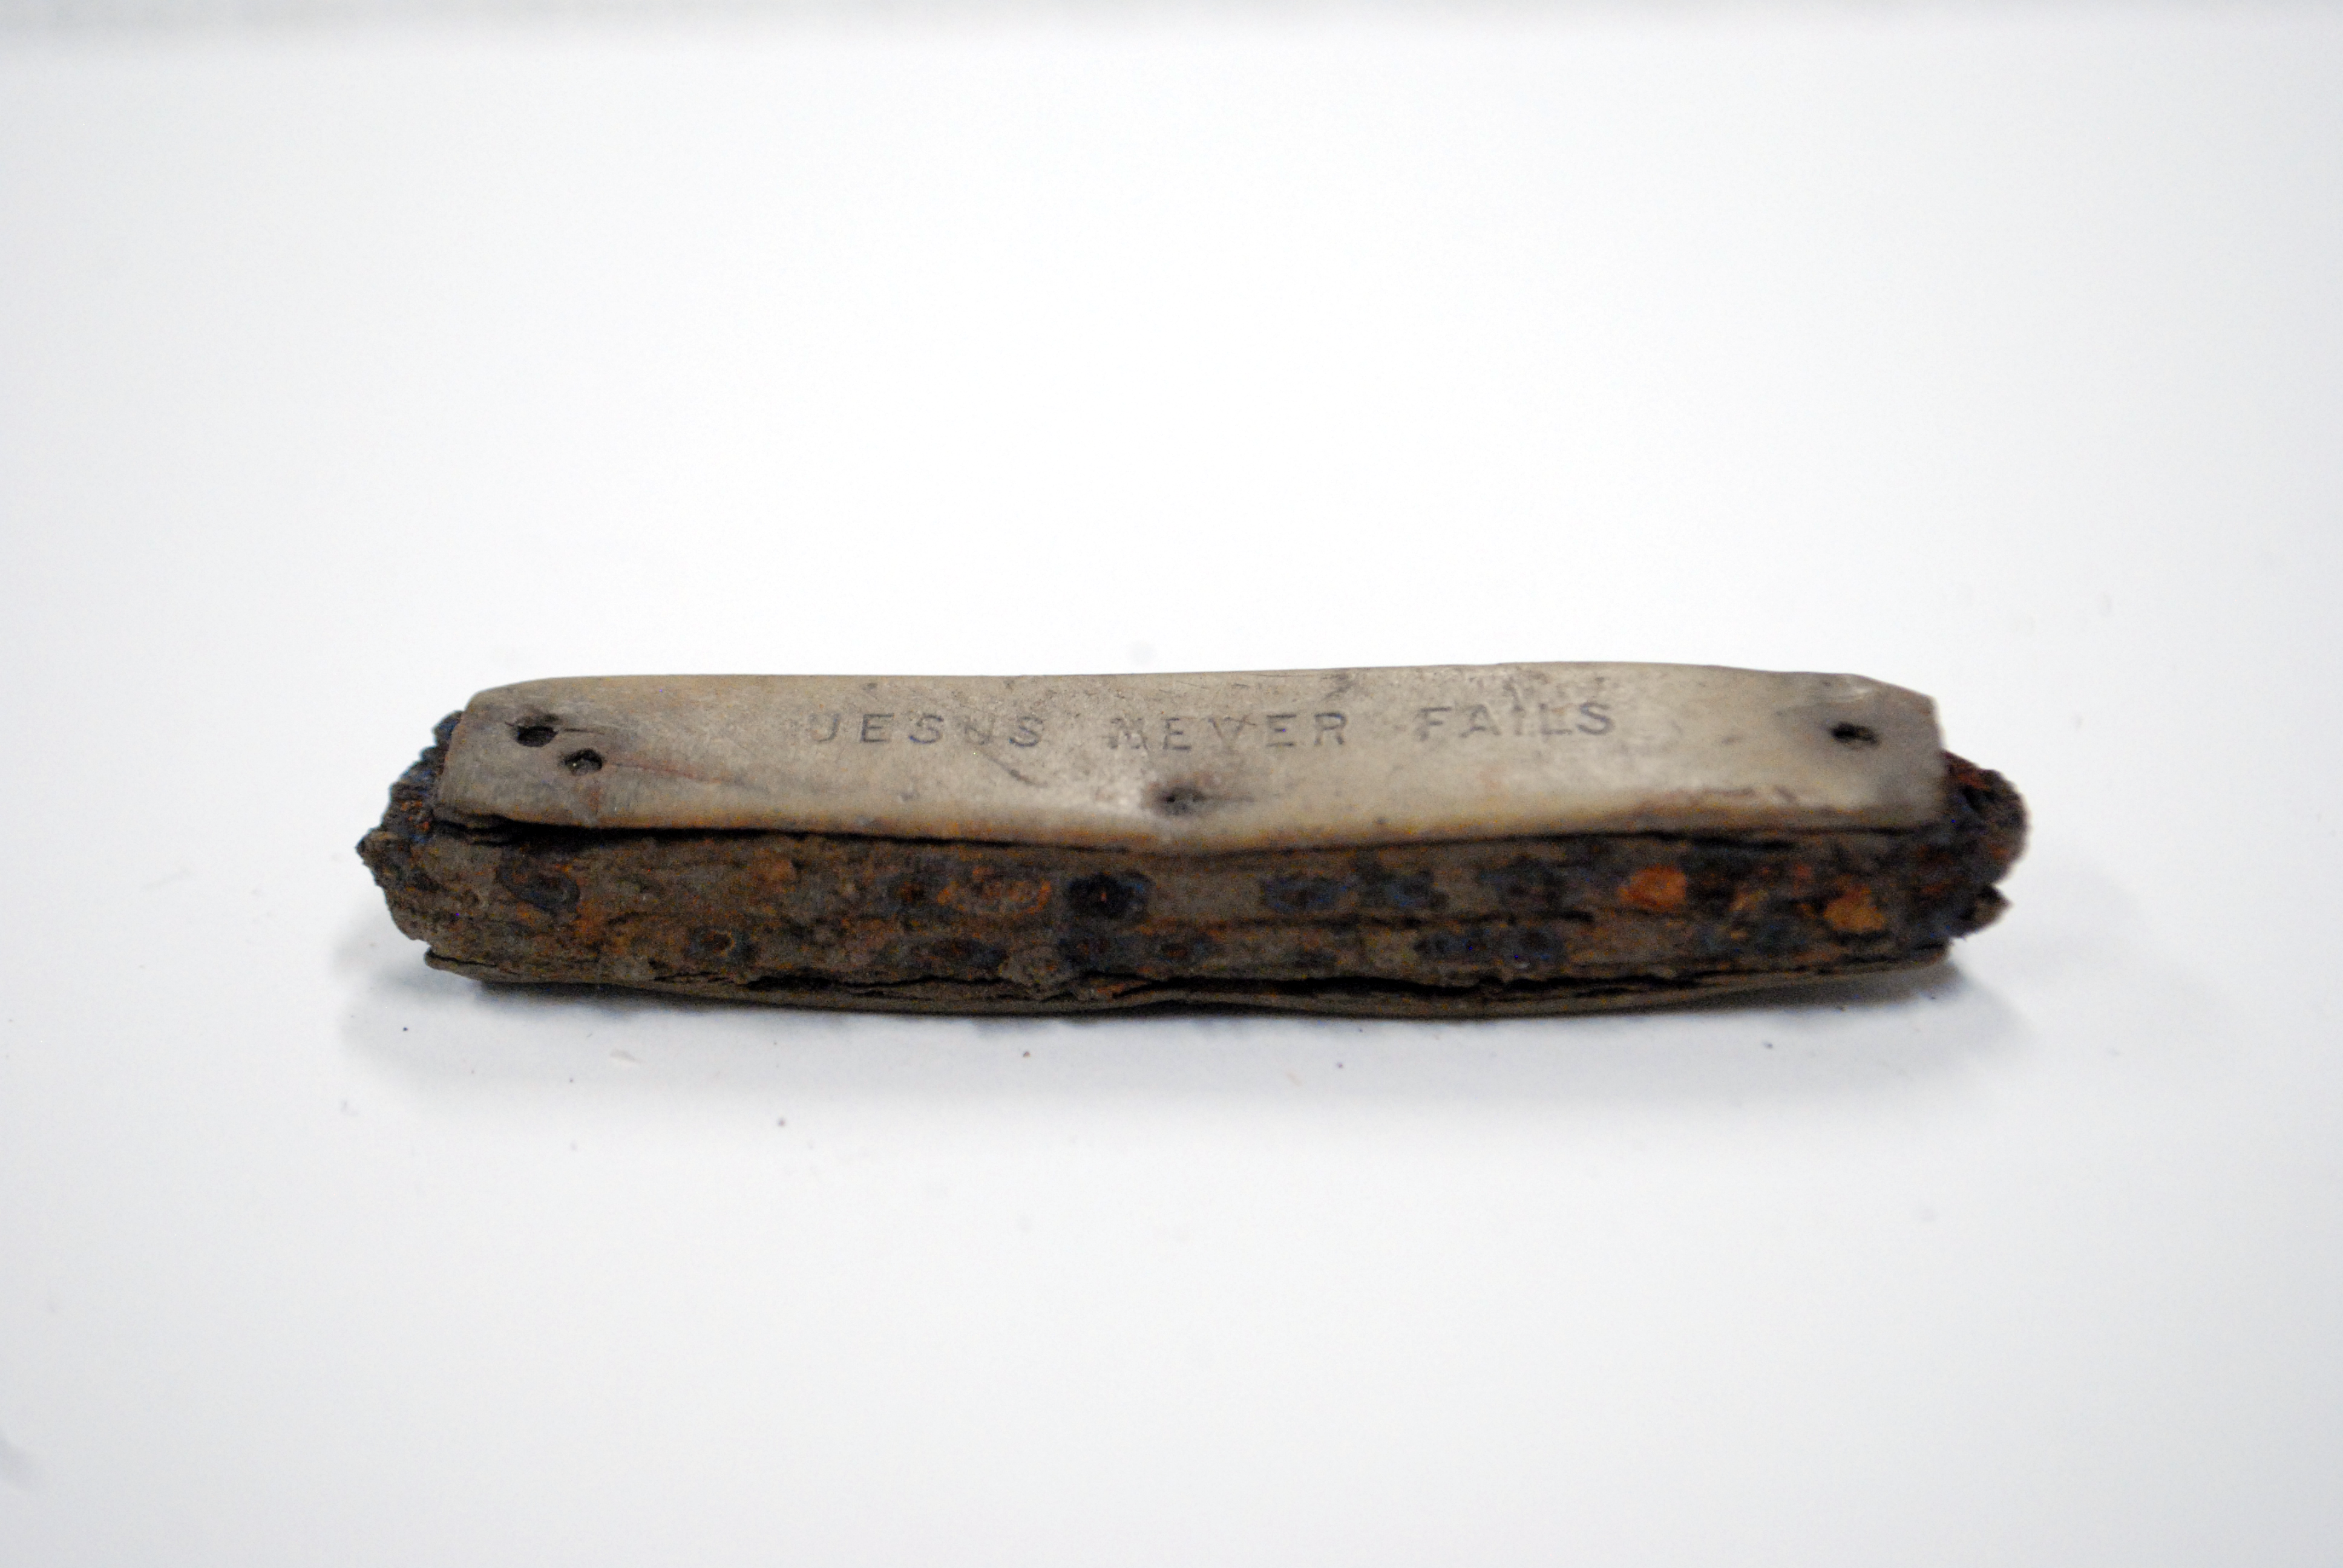 Bone-handled pocket knife reading “JESUS NEVER FAILS”. Uncovered in 2003 as a
part of the Tweed Courthouse, City Hall Park Project